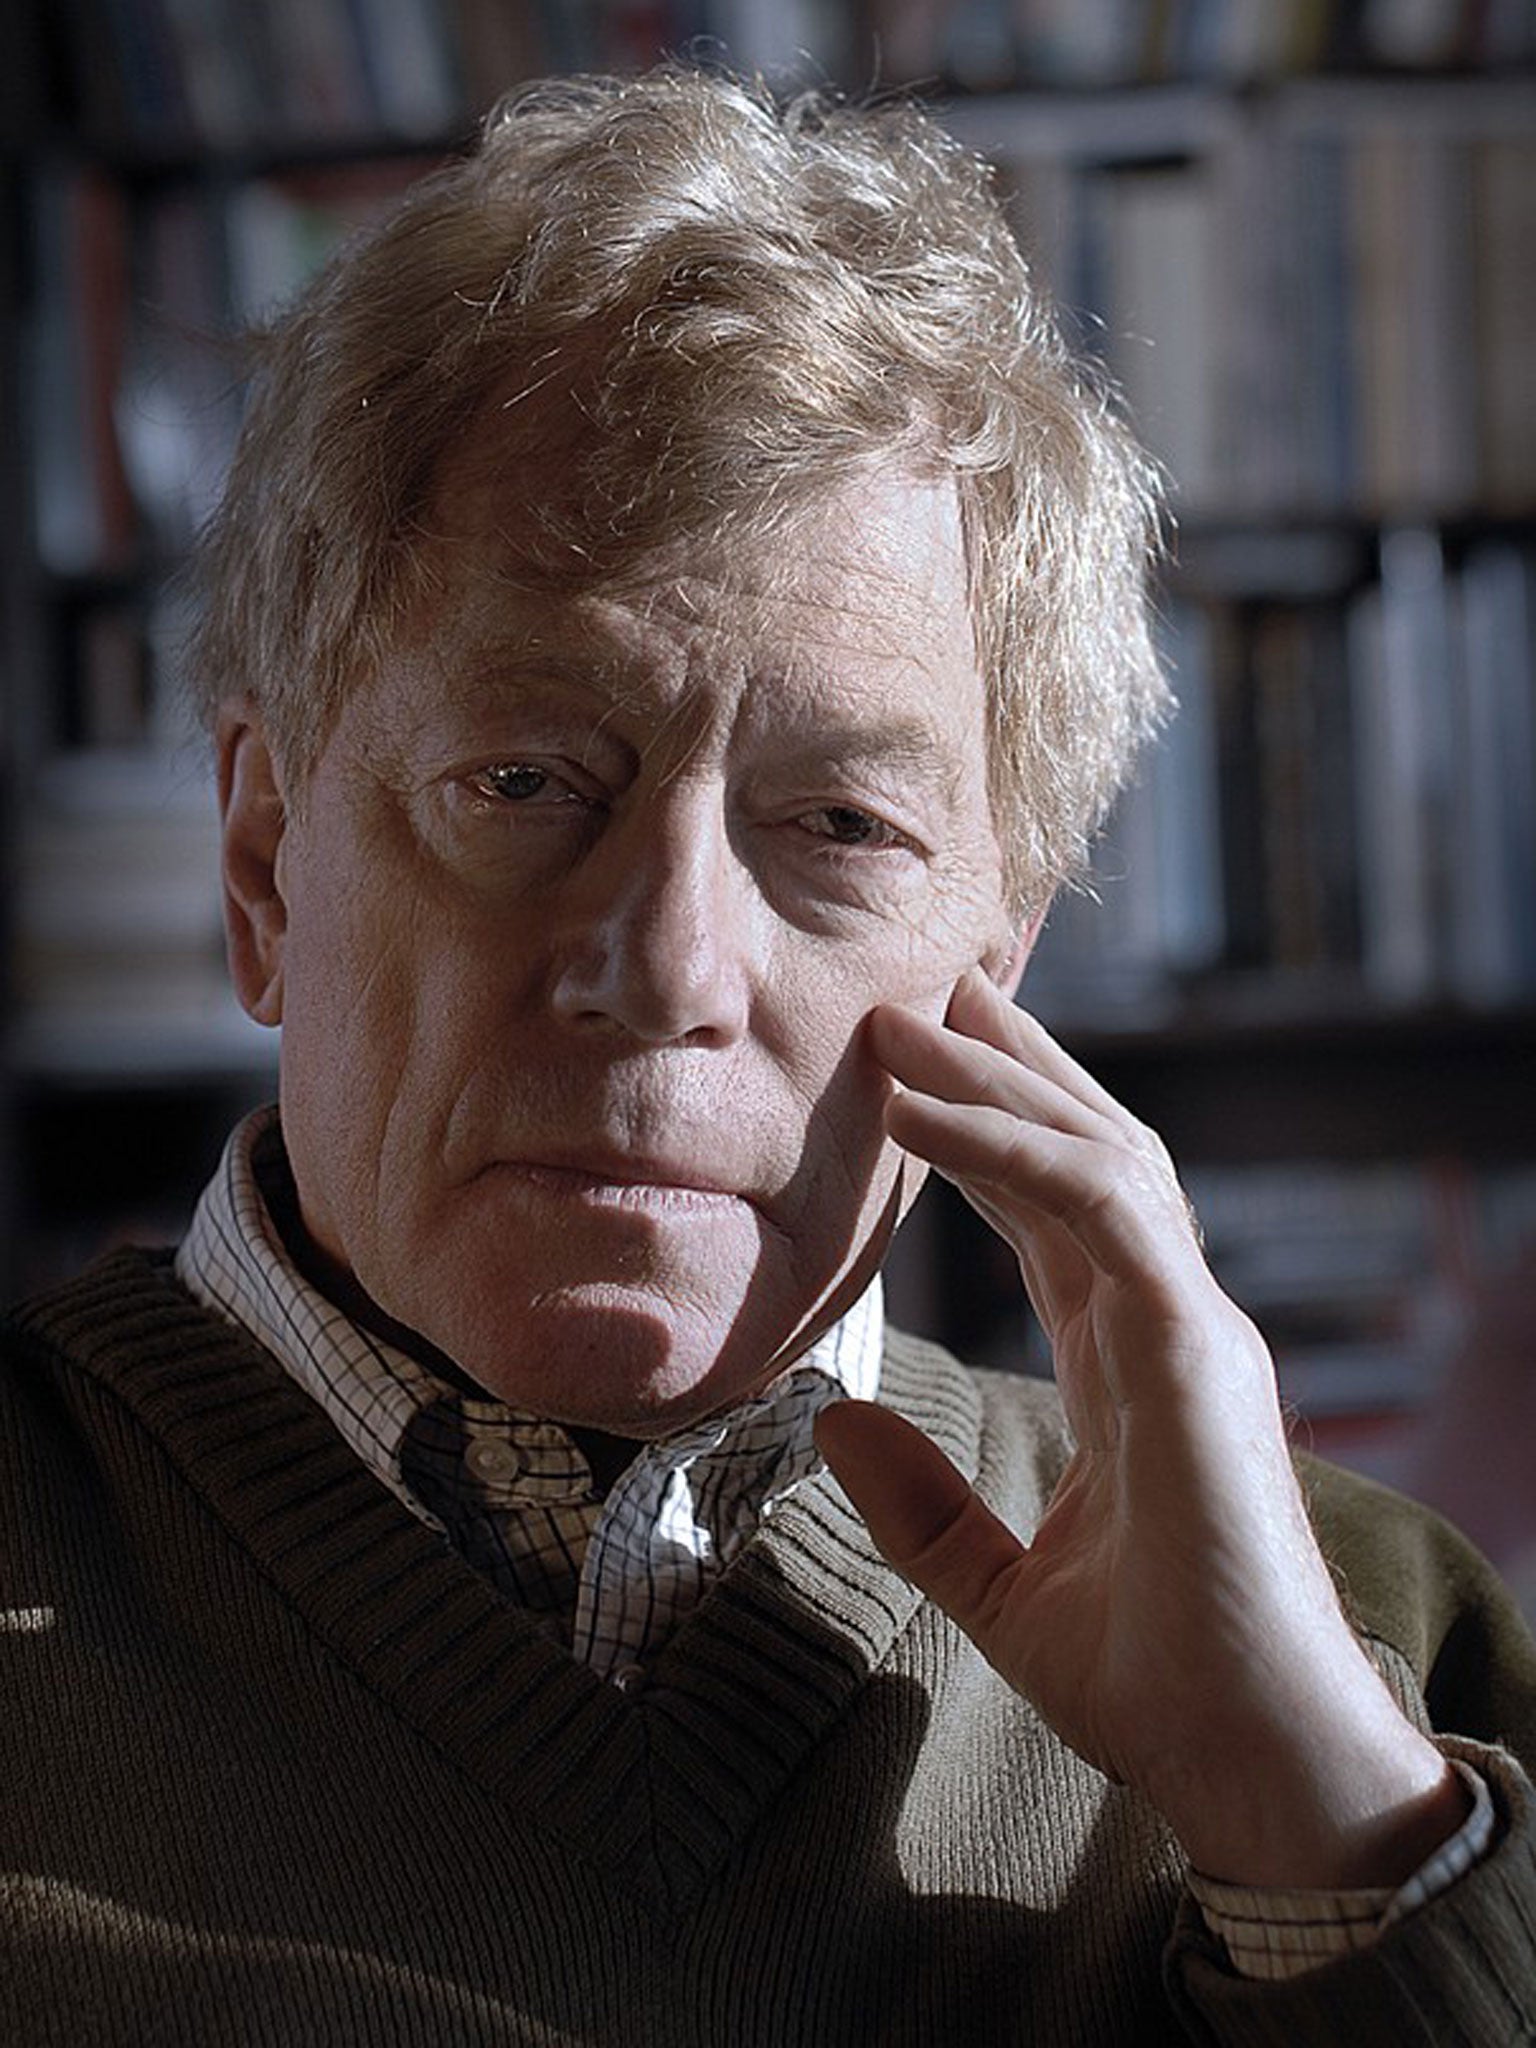 Roger Scruton: A heavyweight expert doing what he does best